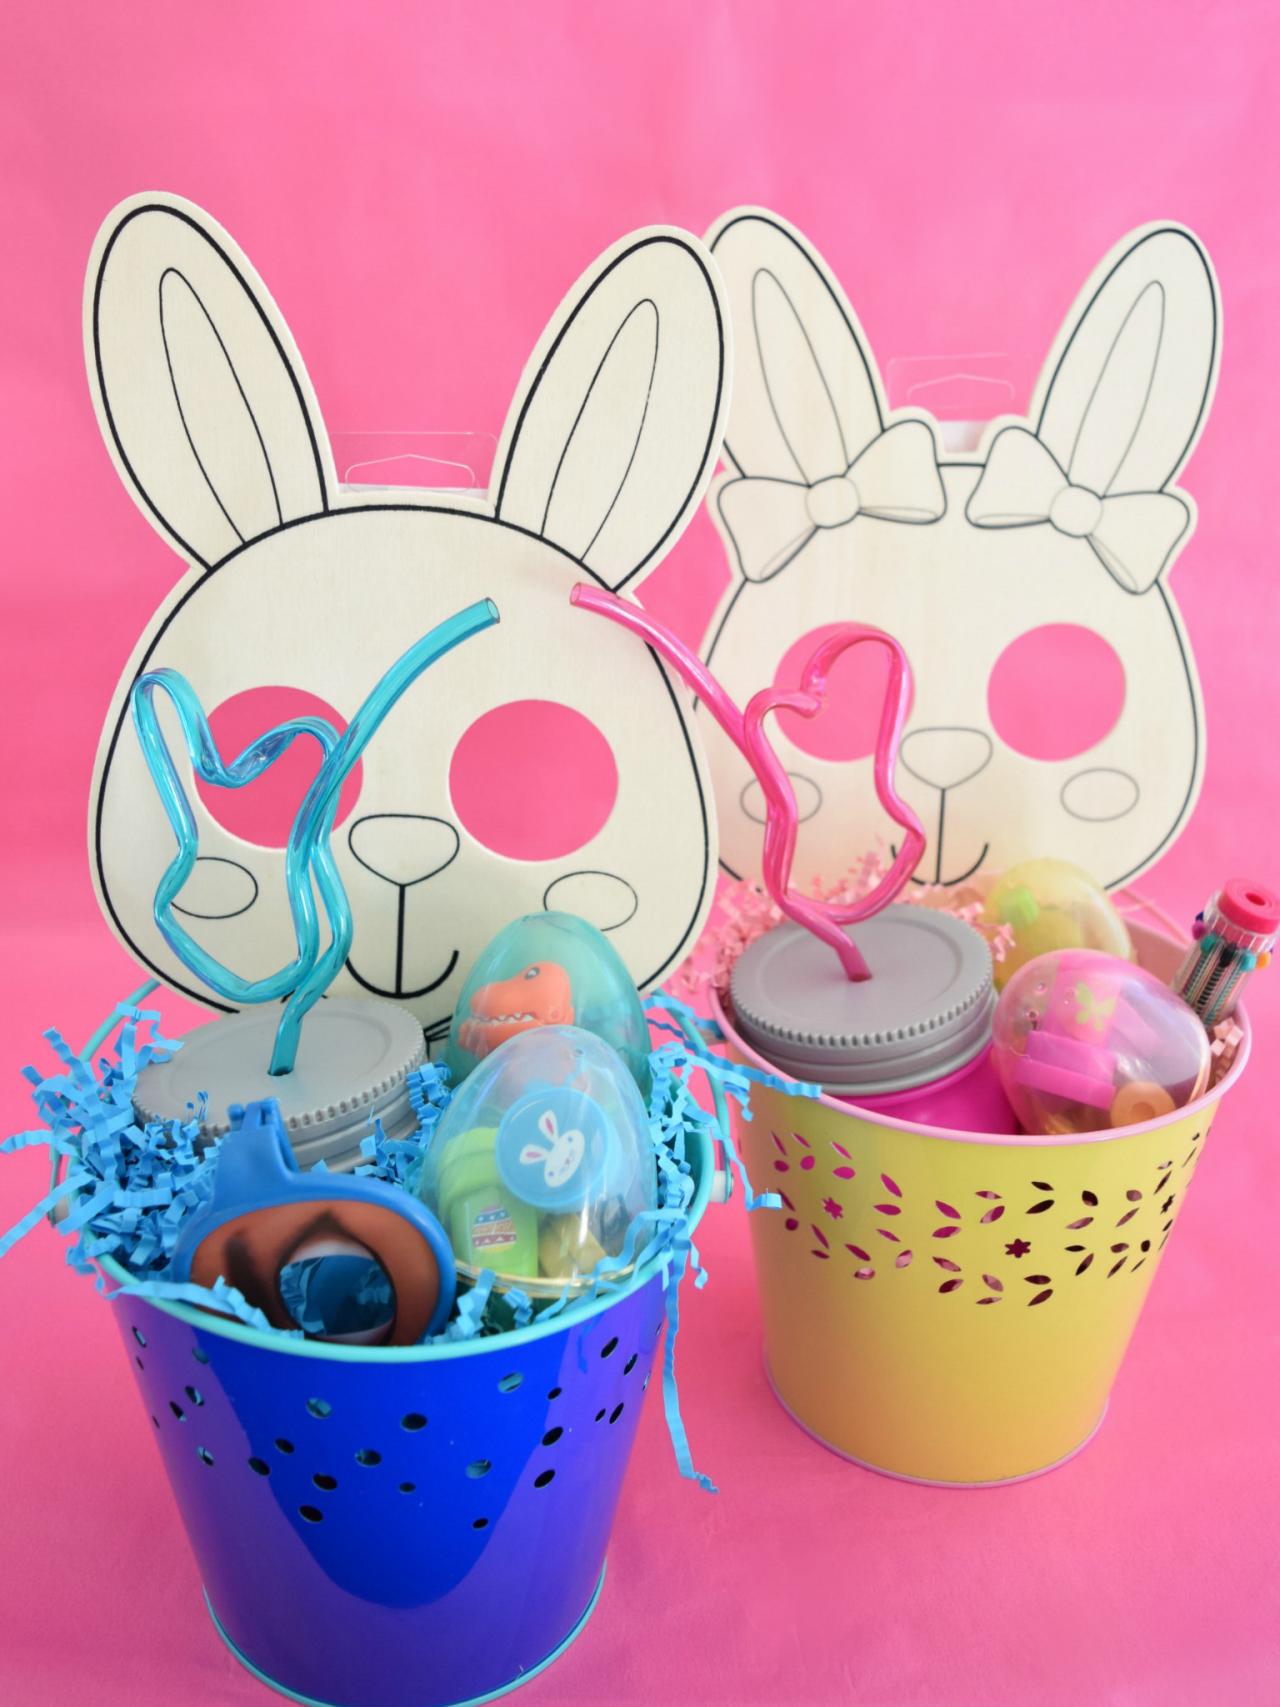 50+ Easter Basket Filler Ideas for Kids of Every Age